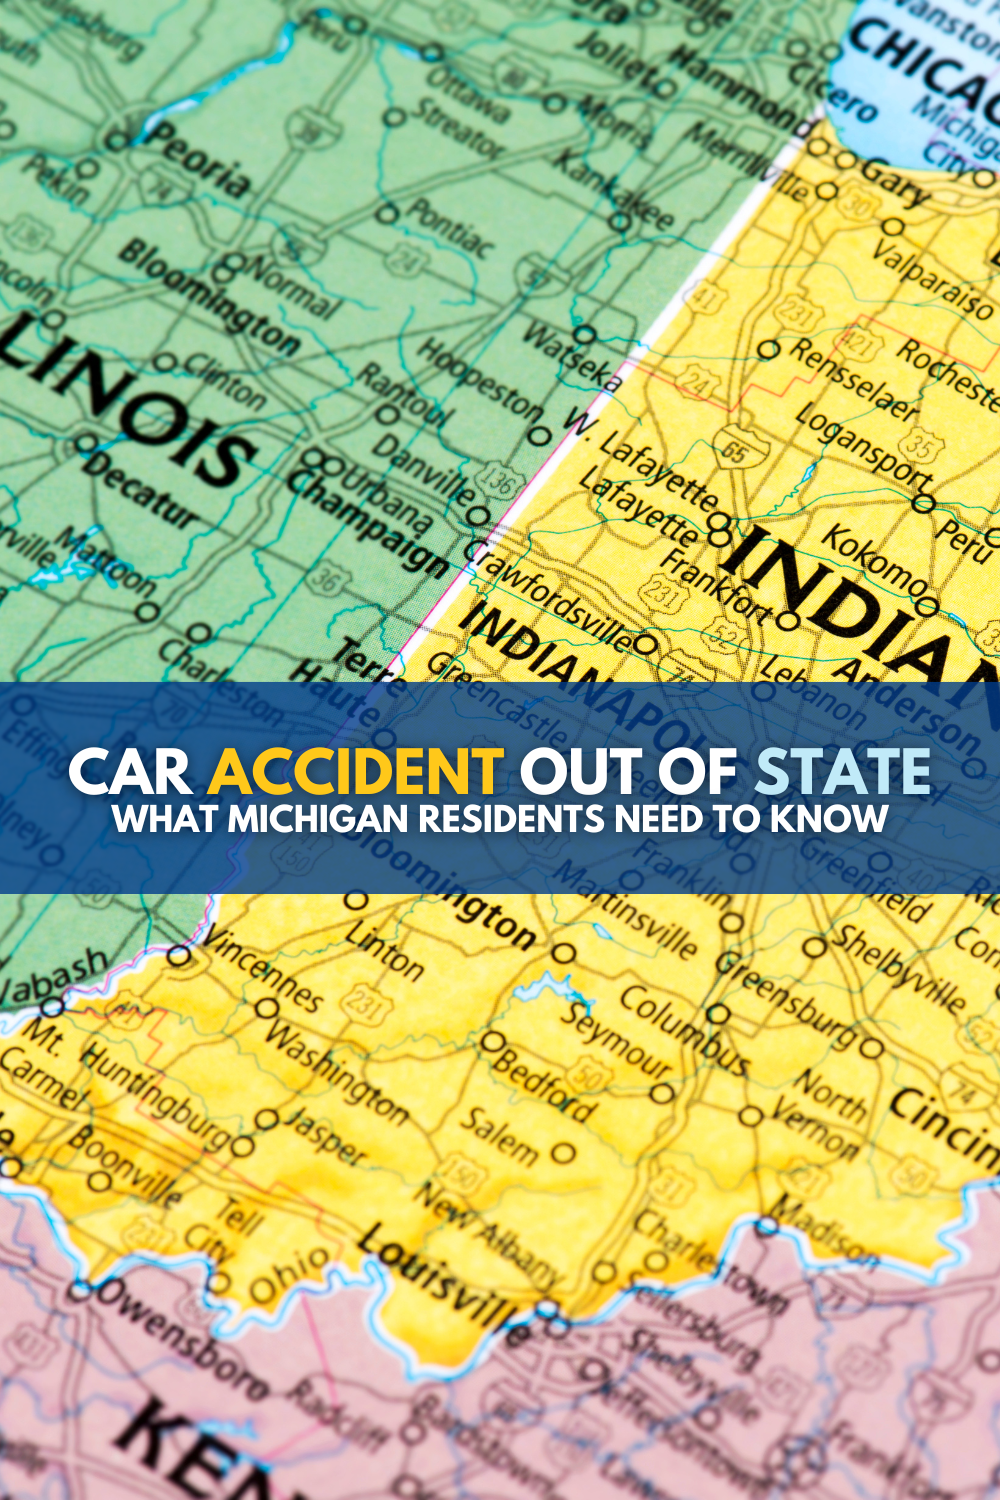 Car Accident Out Of State: What Michigan Residents Need To Know